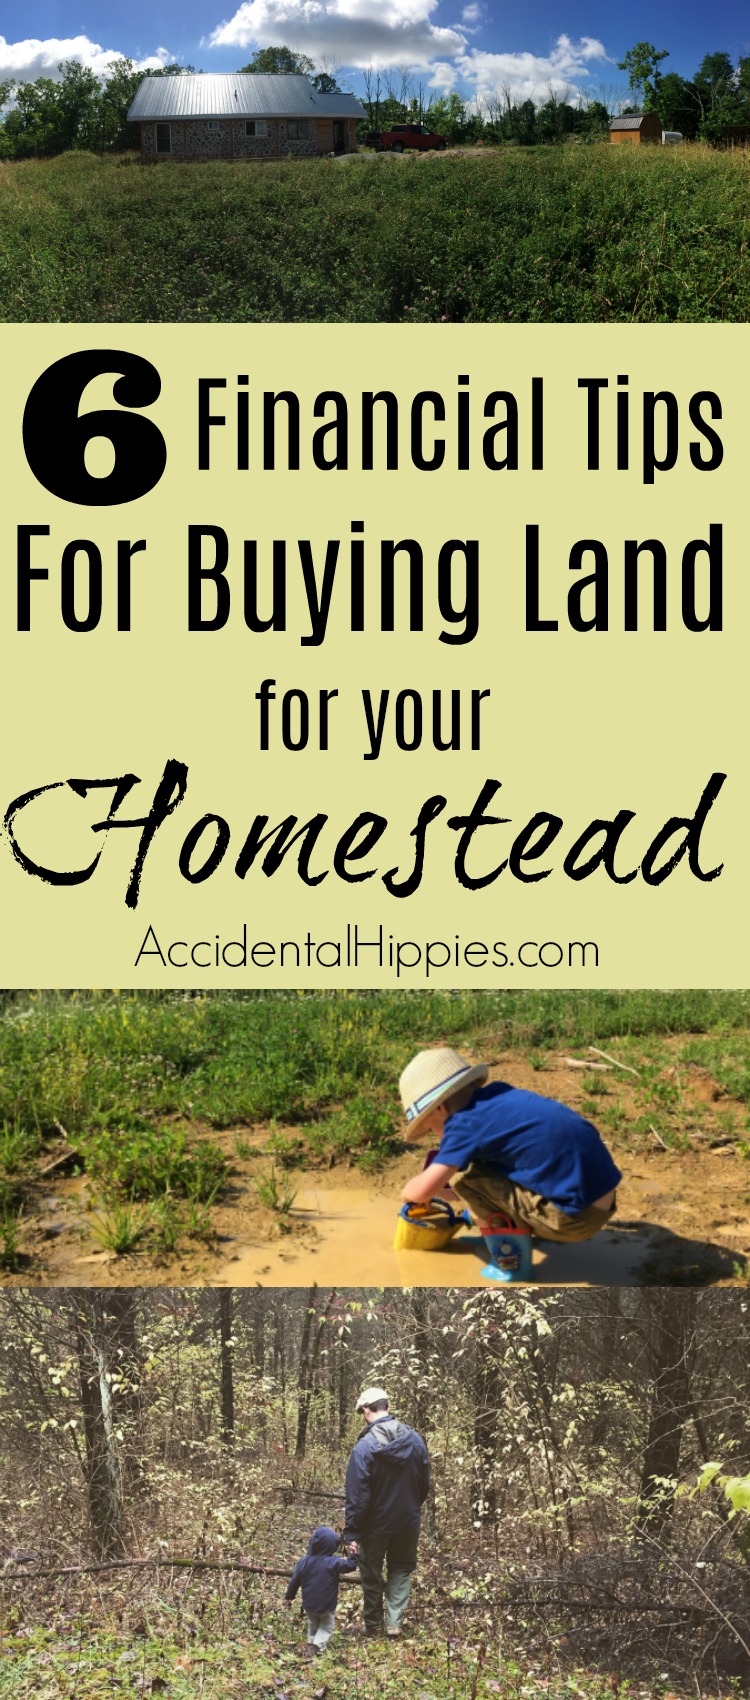 Our 6 biggest financial lessons we learned while buying land to build our off grid homestead.